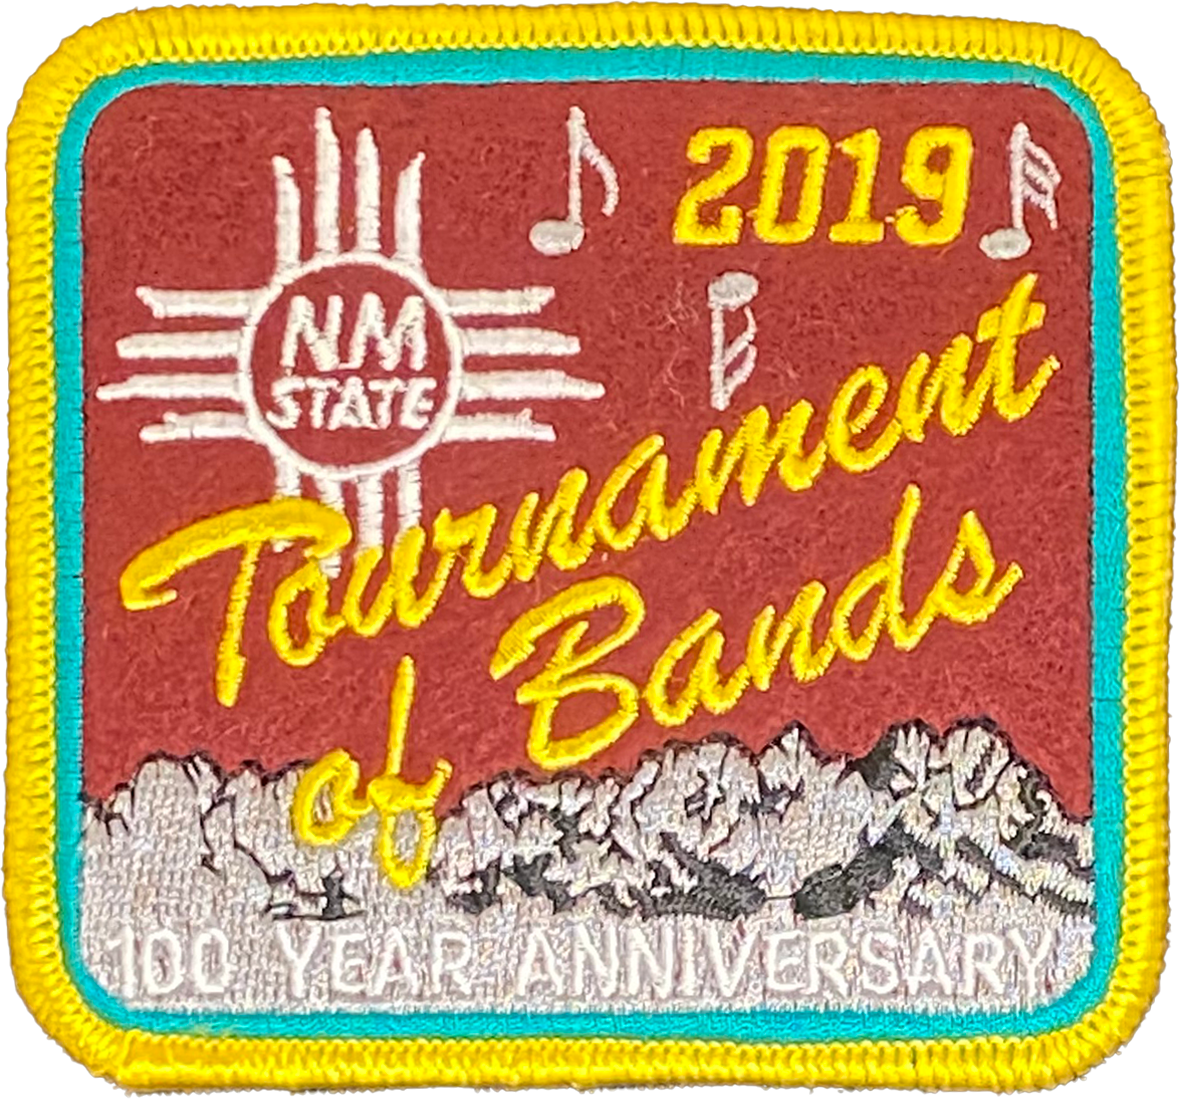 Tournament of Bands 2019 Patch